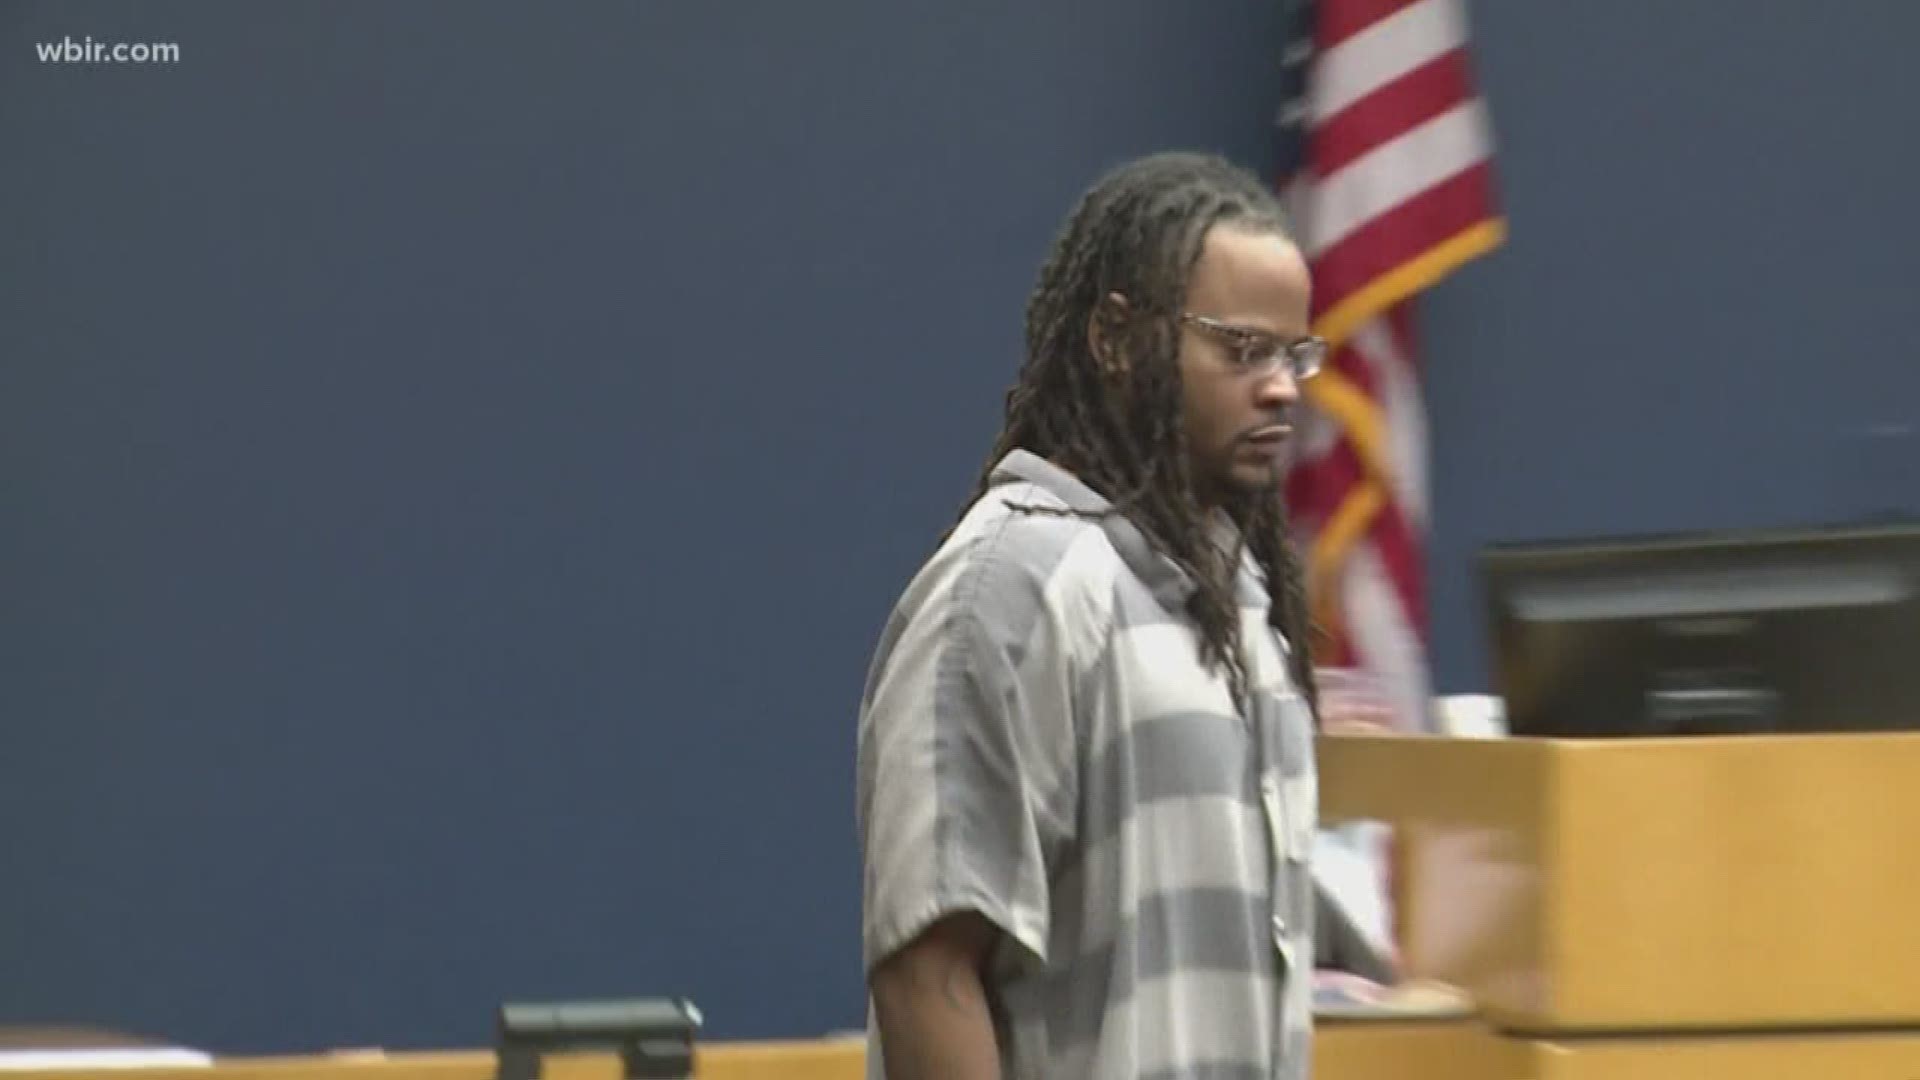 37-year-old Lemaricus Davidson was convicted for killing a young Knox County couple and sentenced to die back in 2009